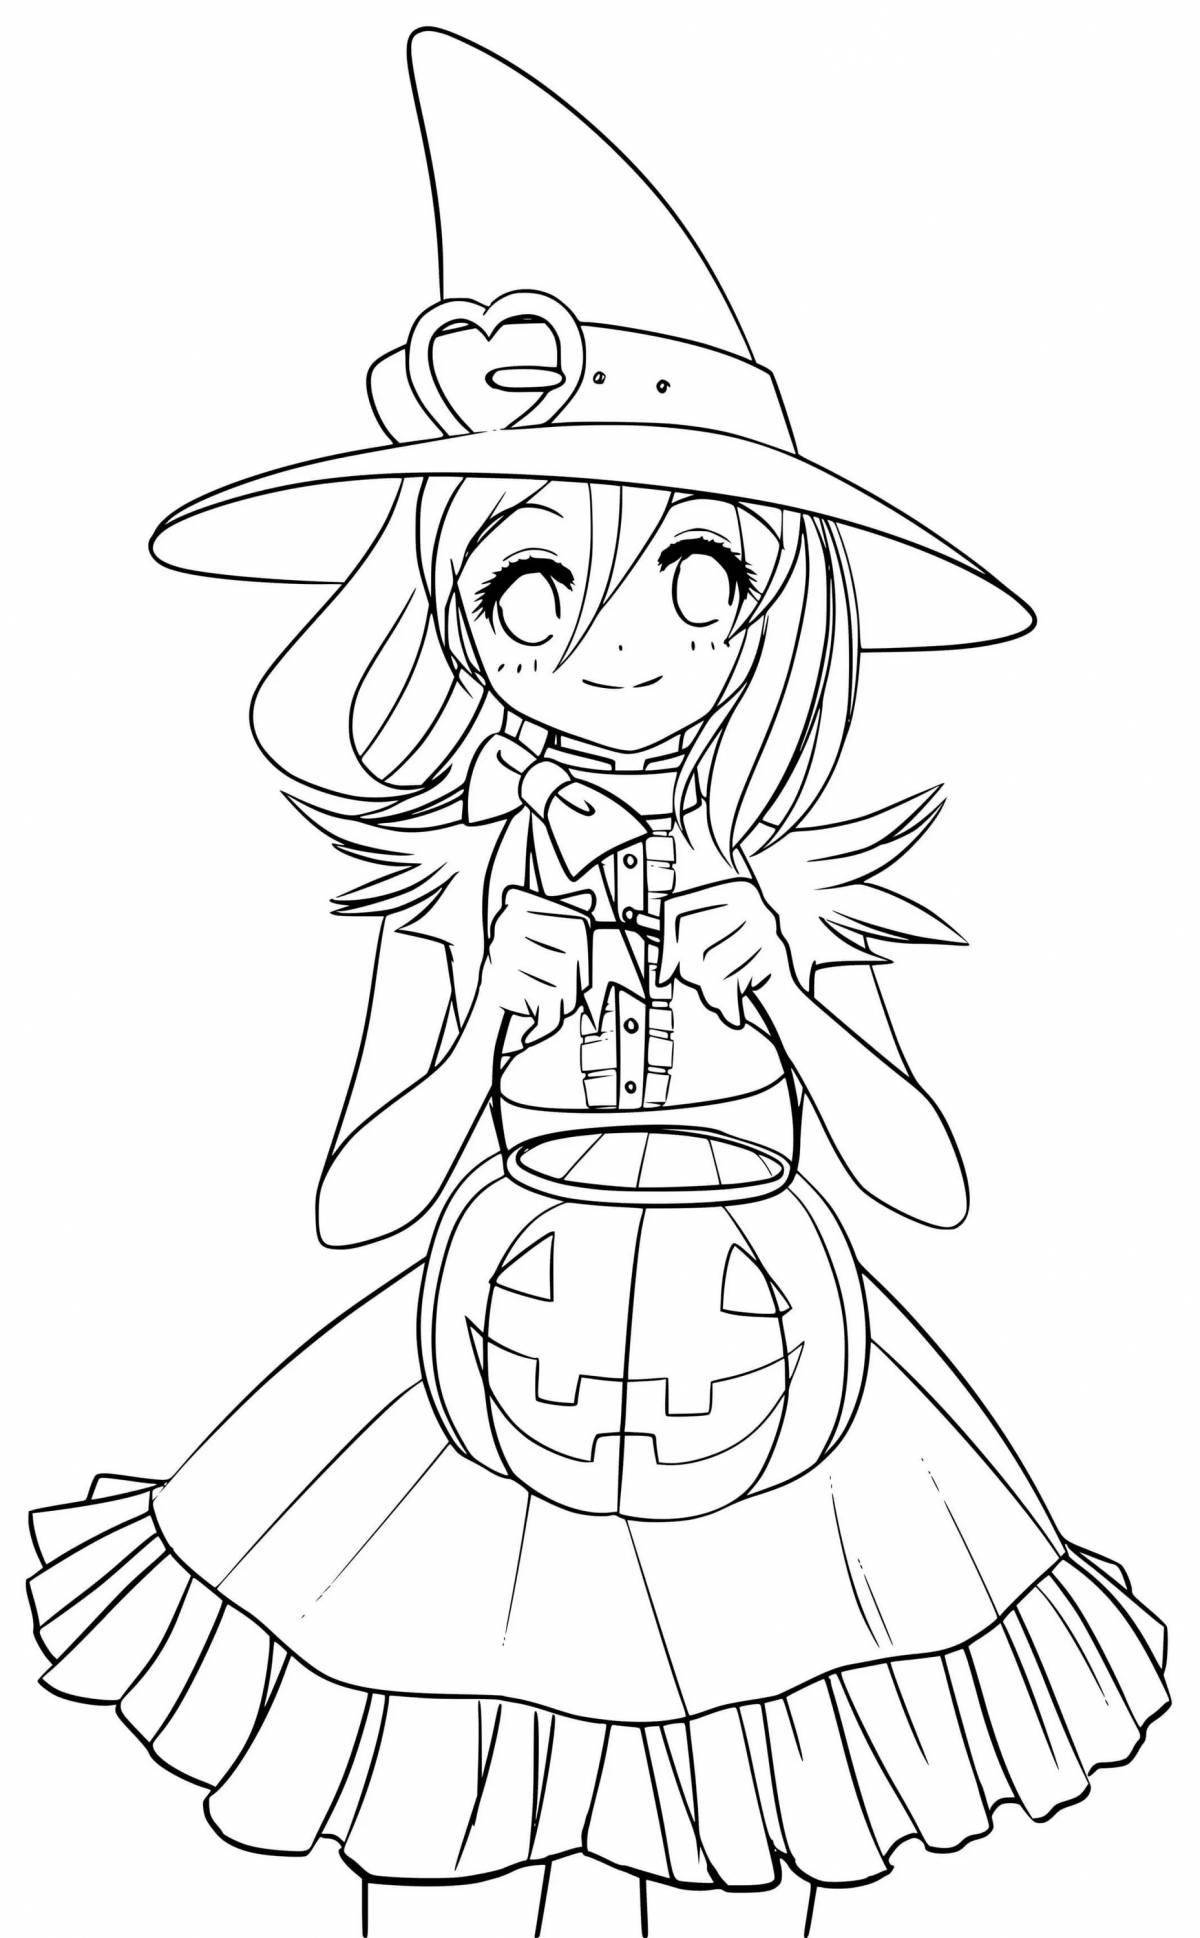 Wonderful ai and witch coloring book